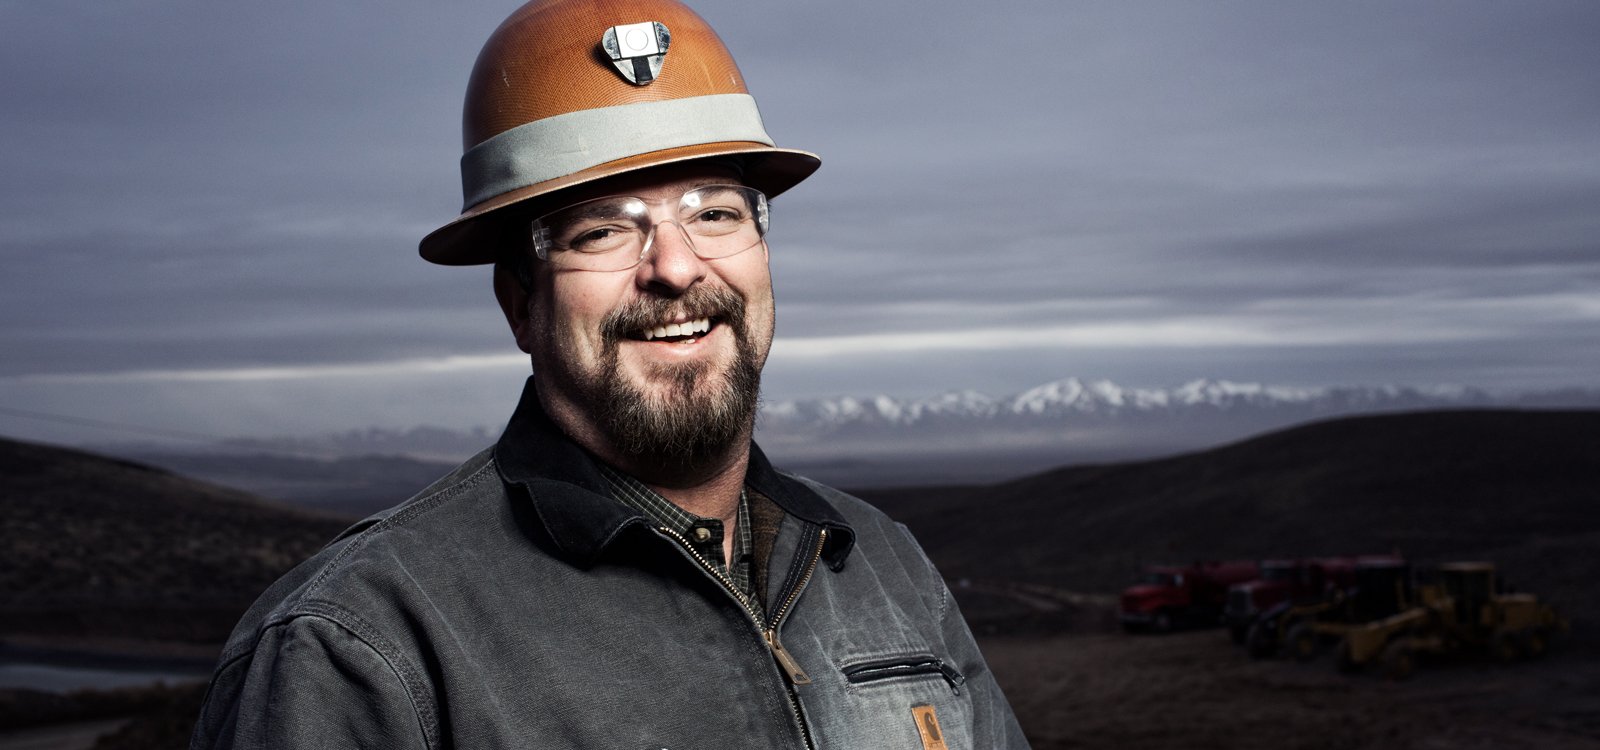 <p>General manager Sid Tolbert has never experienced grades like those at the Klondex Fire Creek mine in his 25-year career.</p>